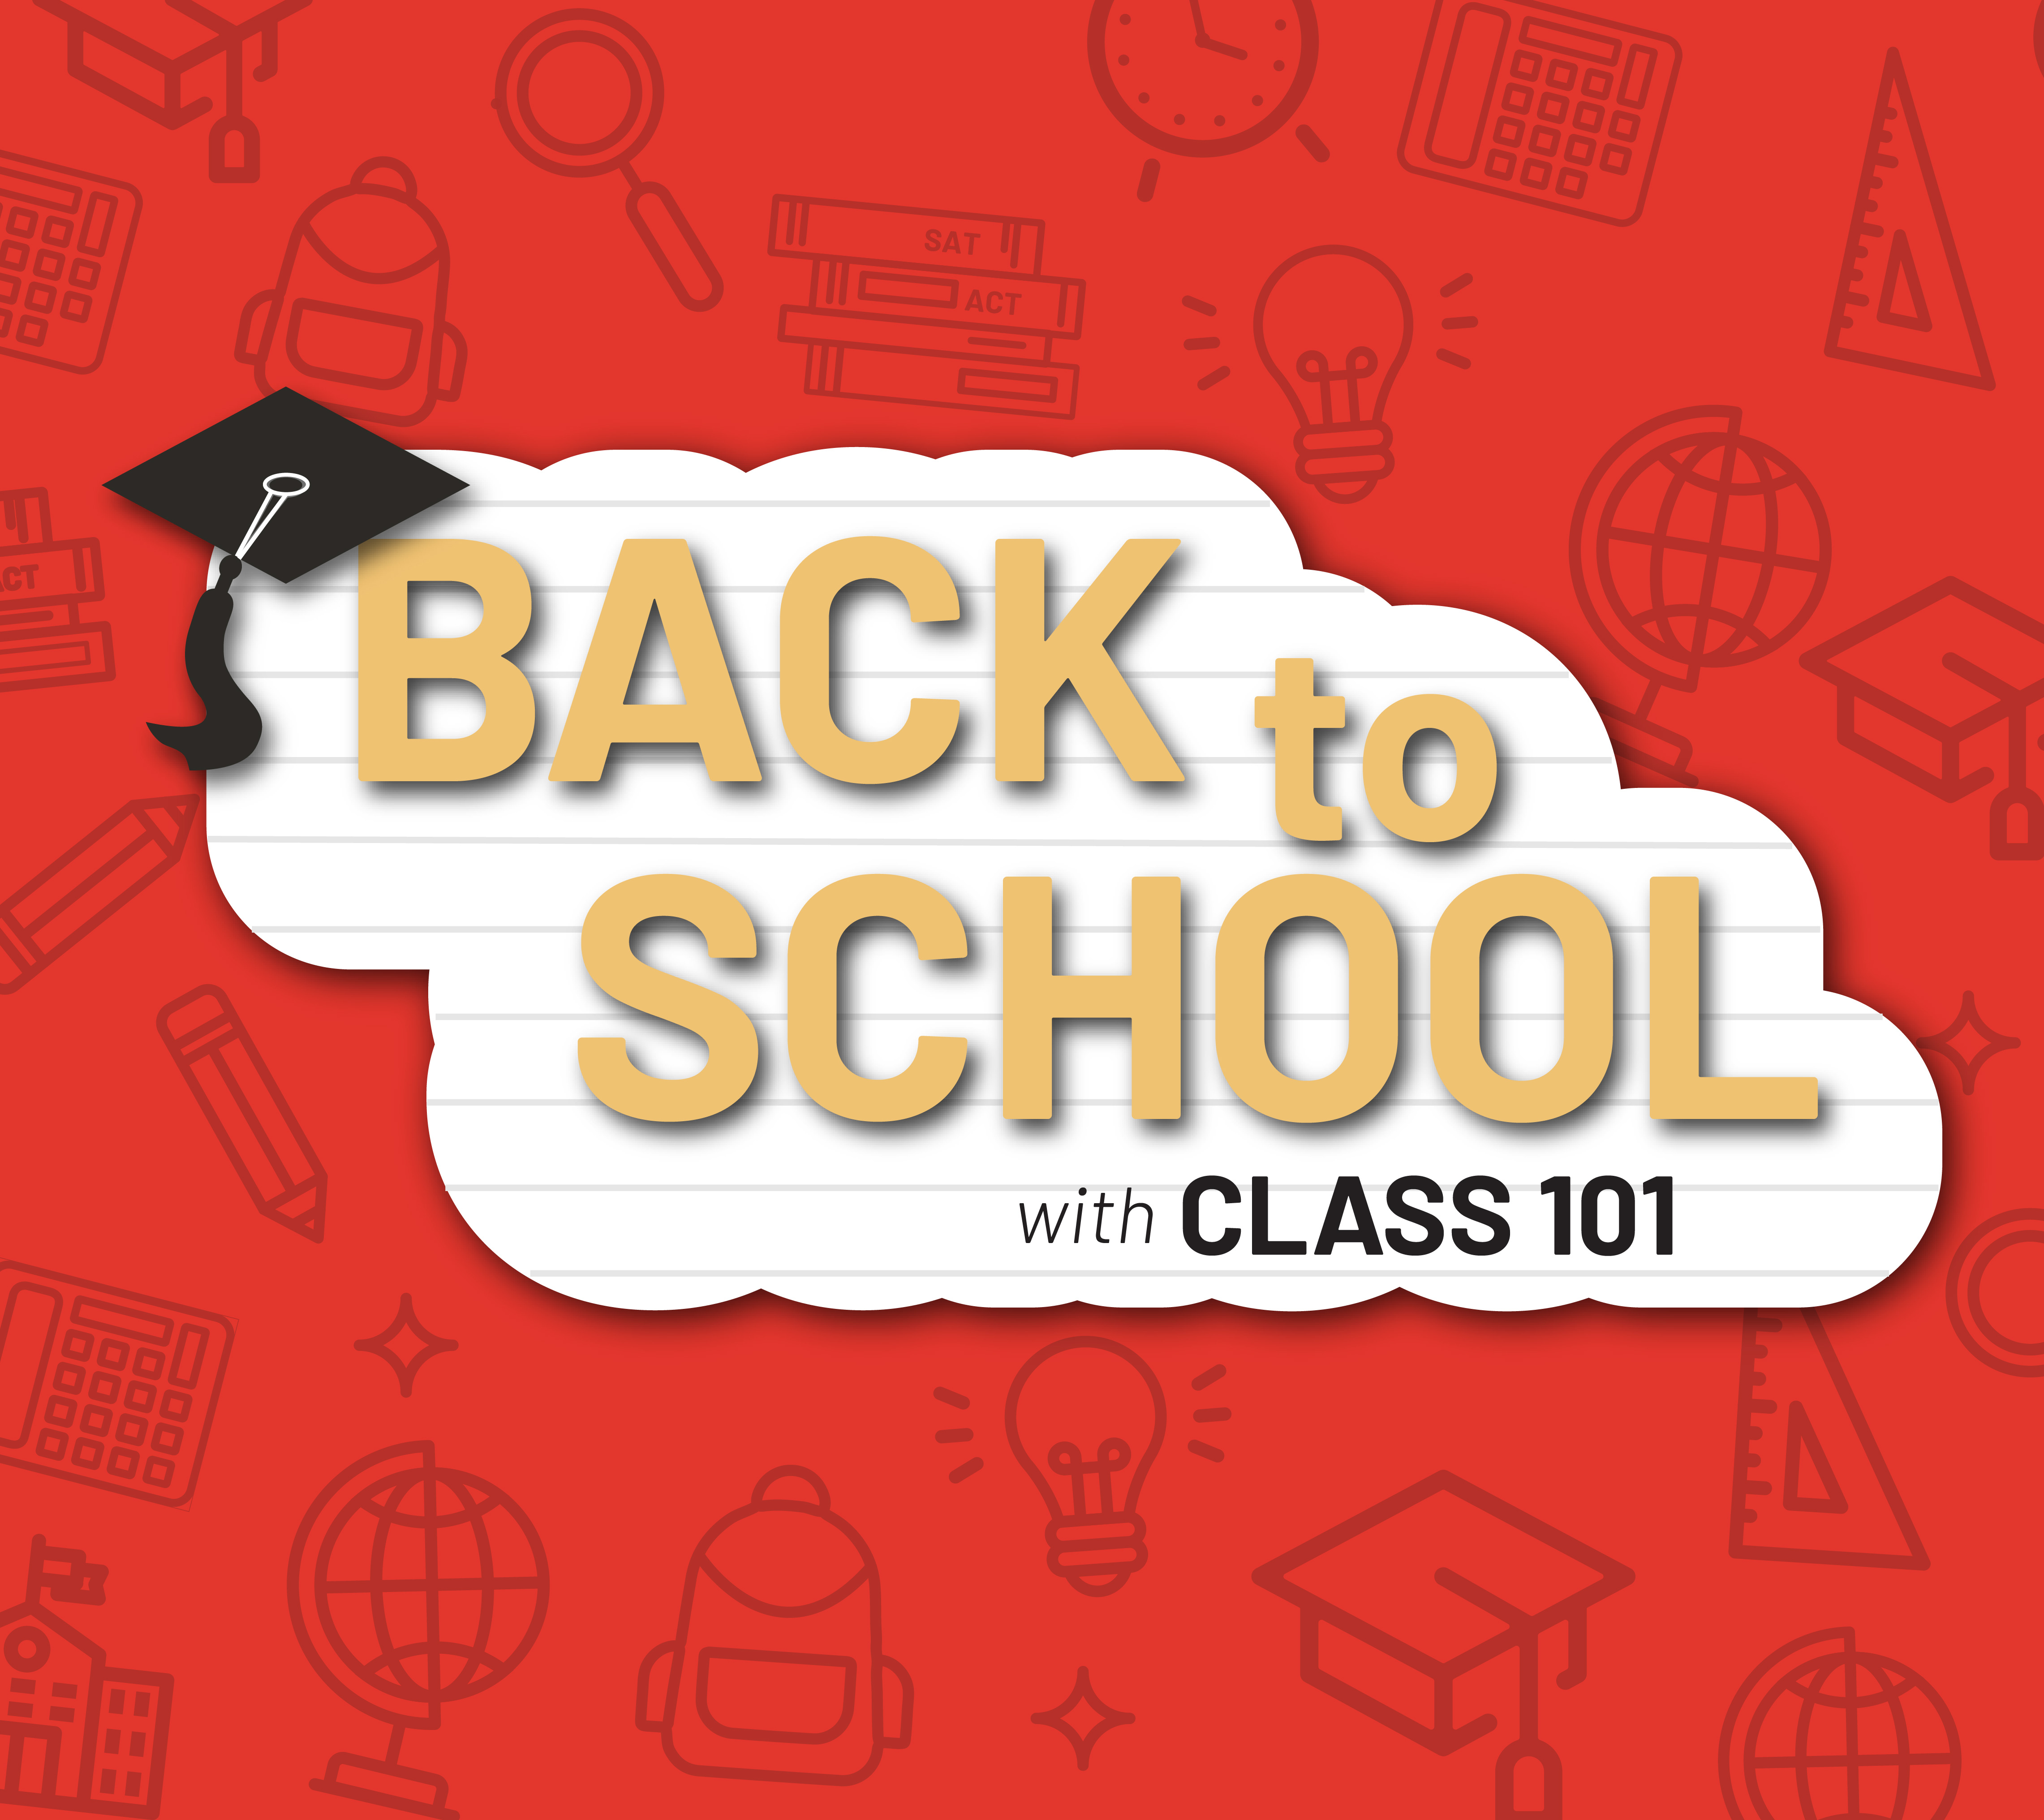 Back to School with Class 101